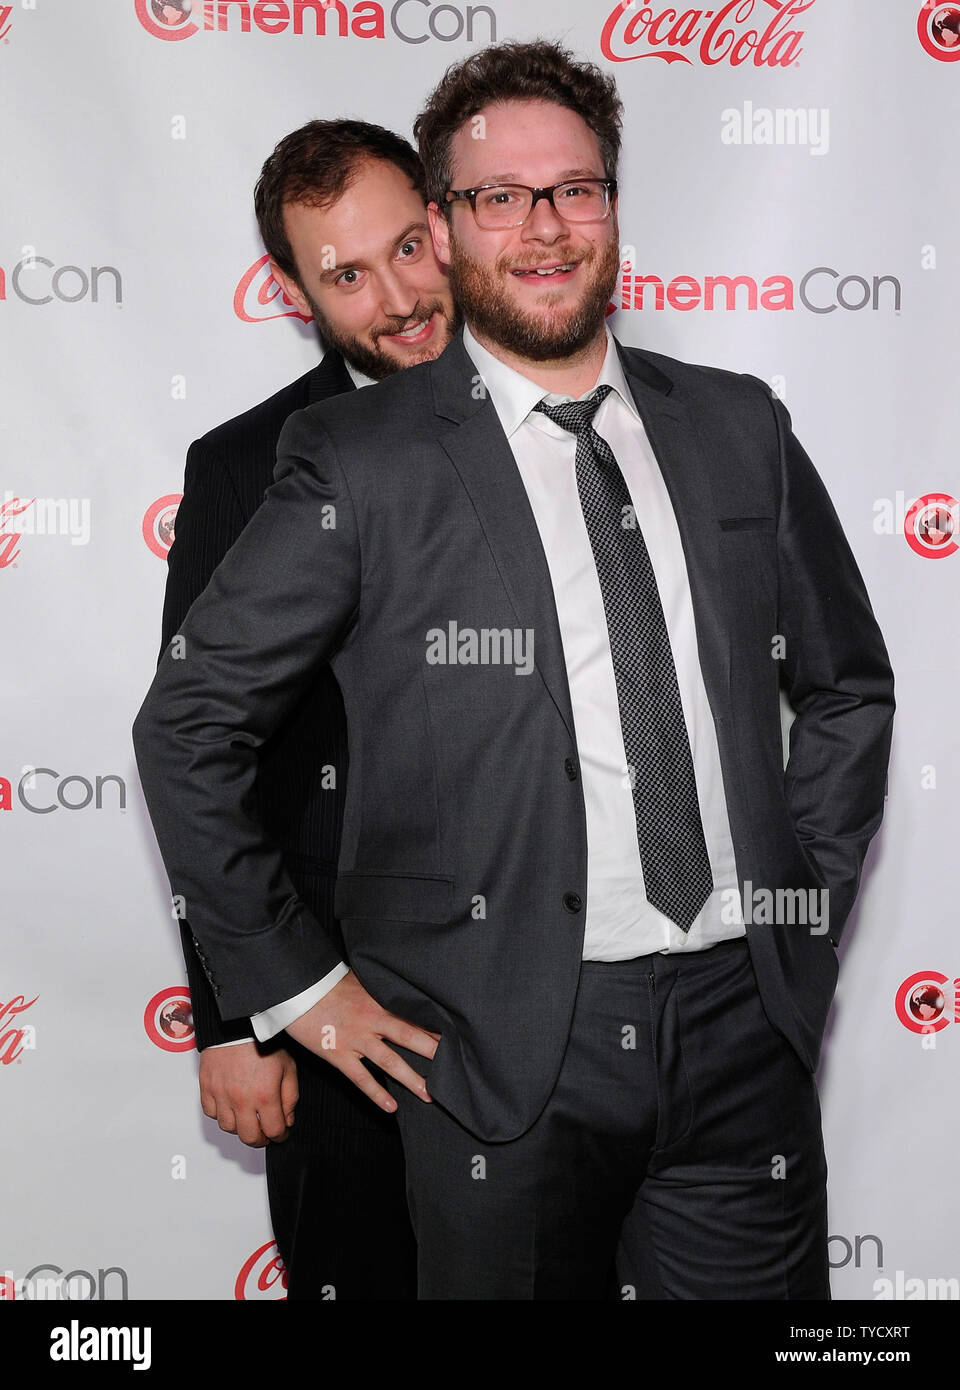 Comedy Filmmakers of the Year award winners Evan Goldberg (L) and Seth Rogen arrive at the CinemaCon awards ceremony at the Pure Nightclub at Caesars Palace during CinemaCon, the official convention of the National Association of Theatre Owners in Las Vegas, Nevada onMarch 27, 2014. UPI/David Becker Stock Photo